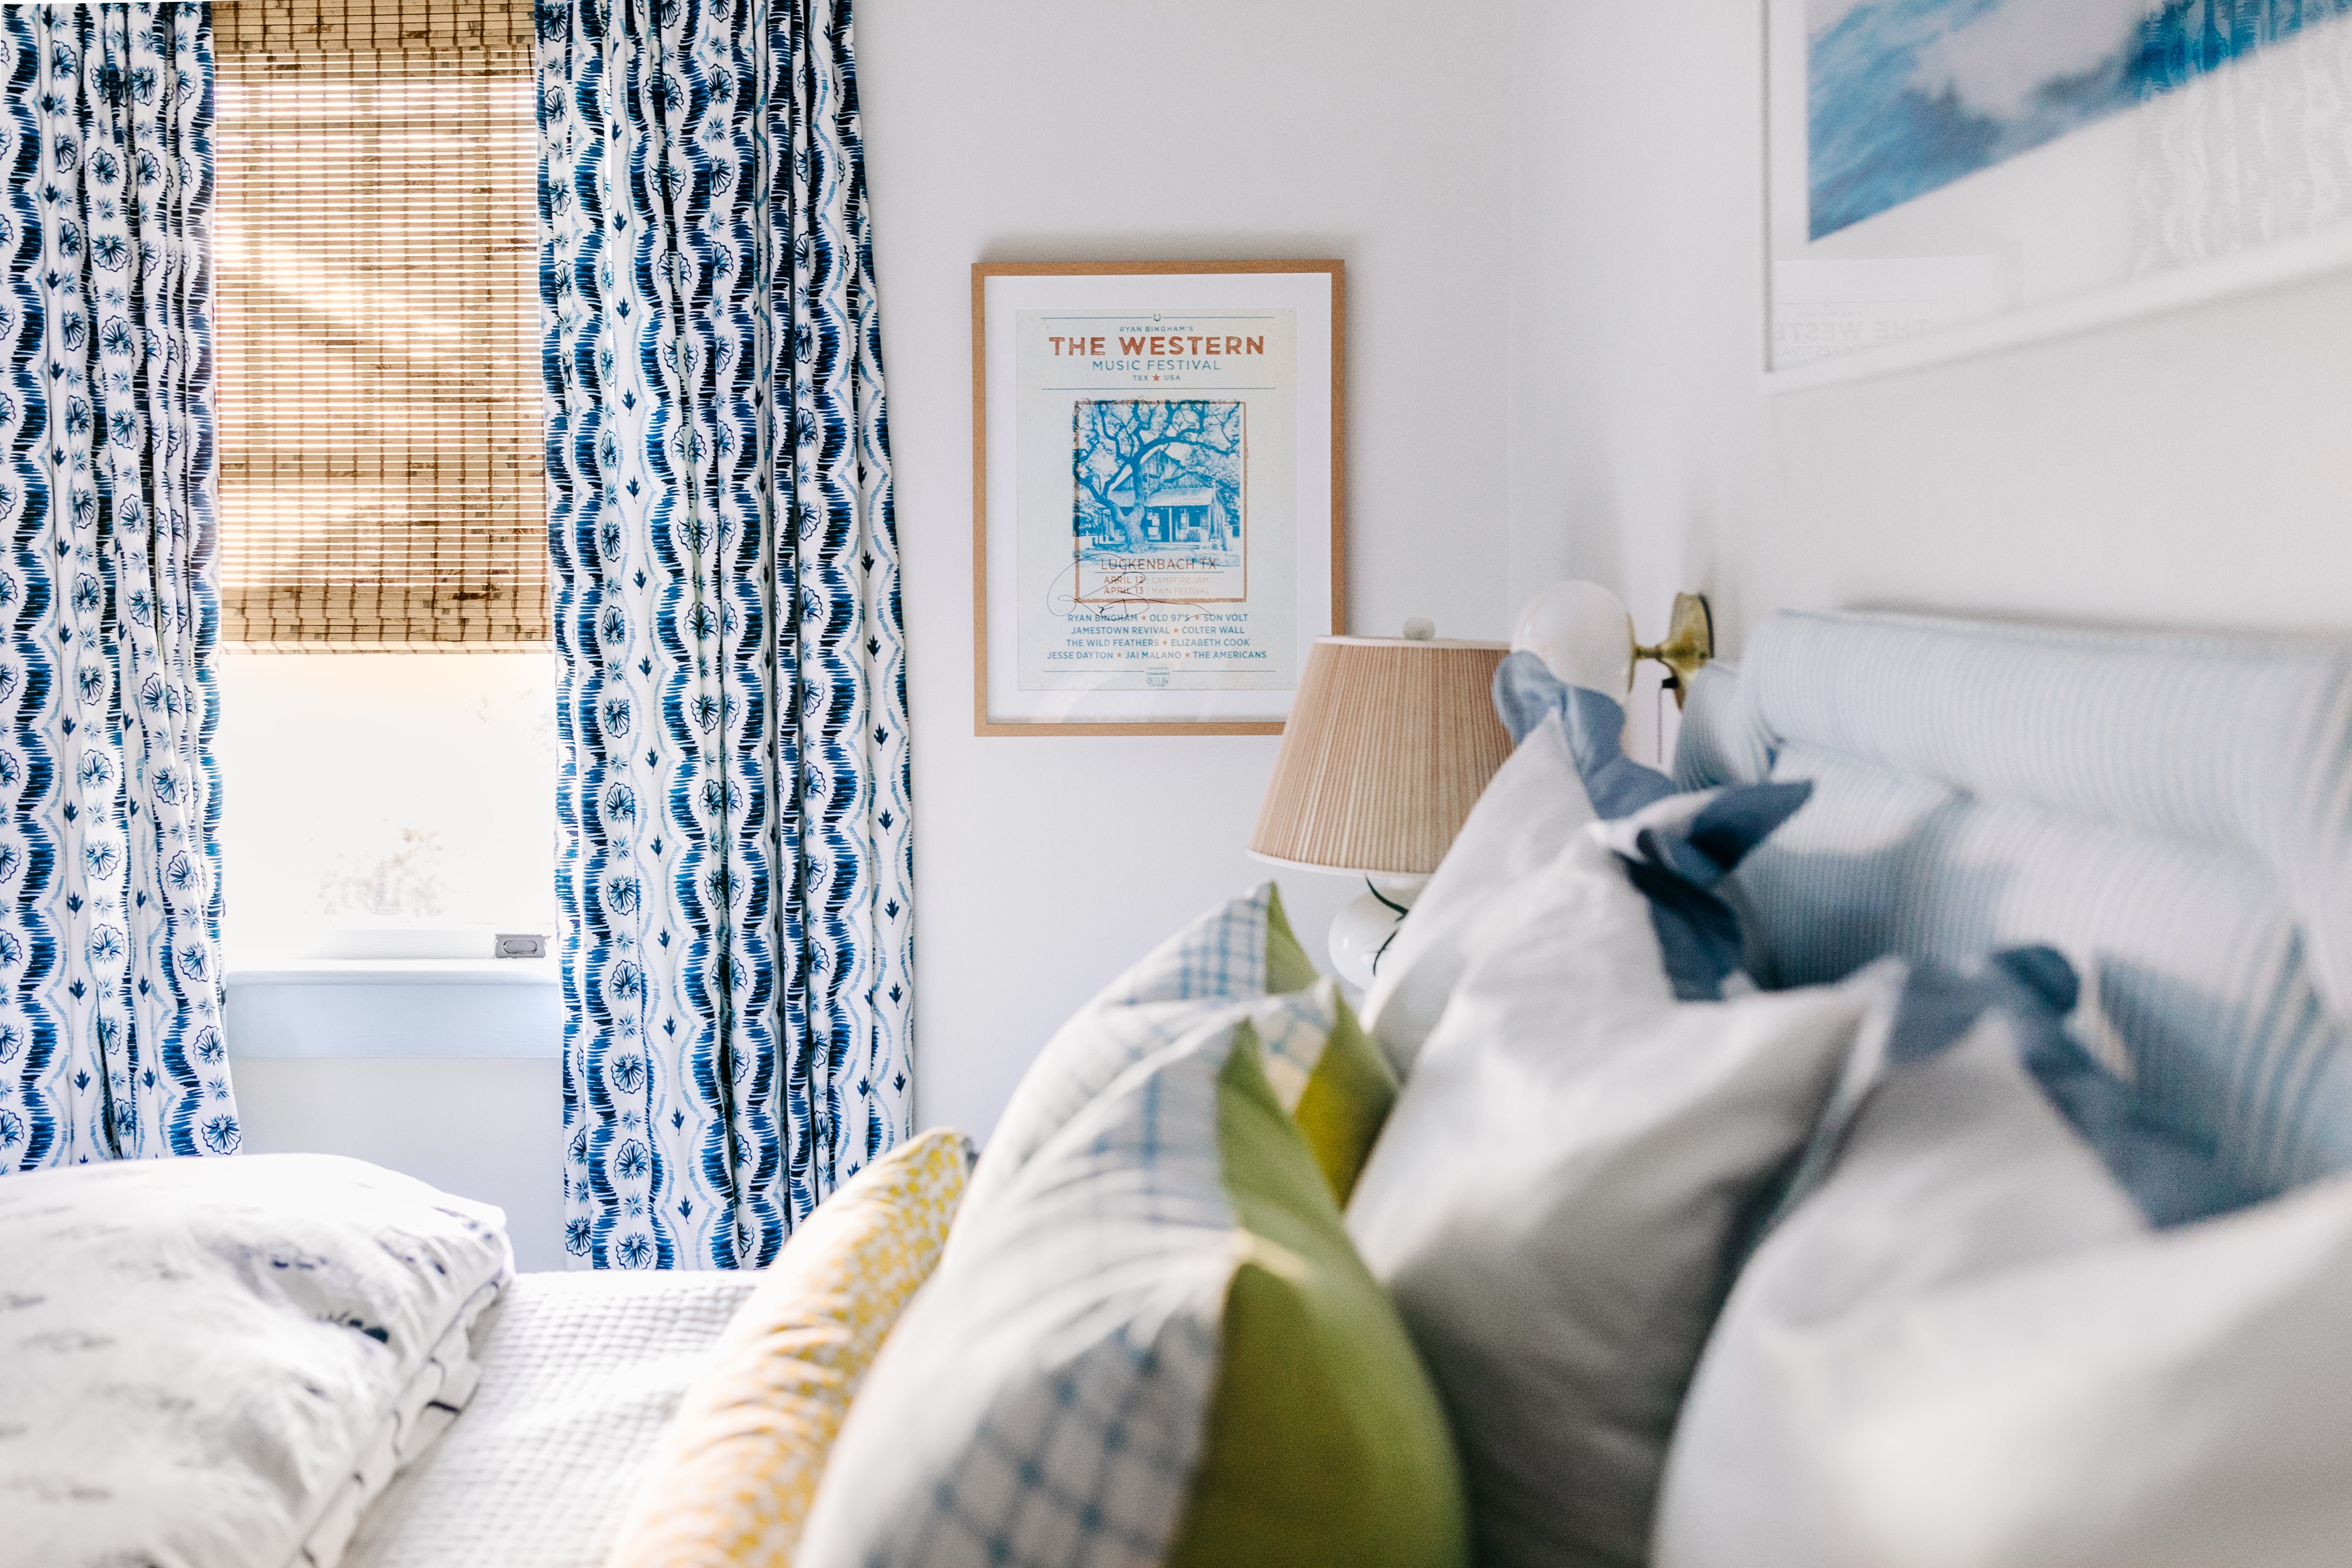 Blue ikat custom curtains hanging on a window with woven roman shades in a white bedroom with a blue striped headboard styled with colorful pillows